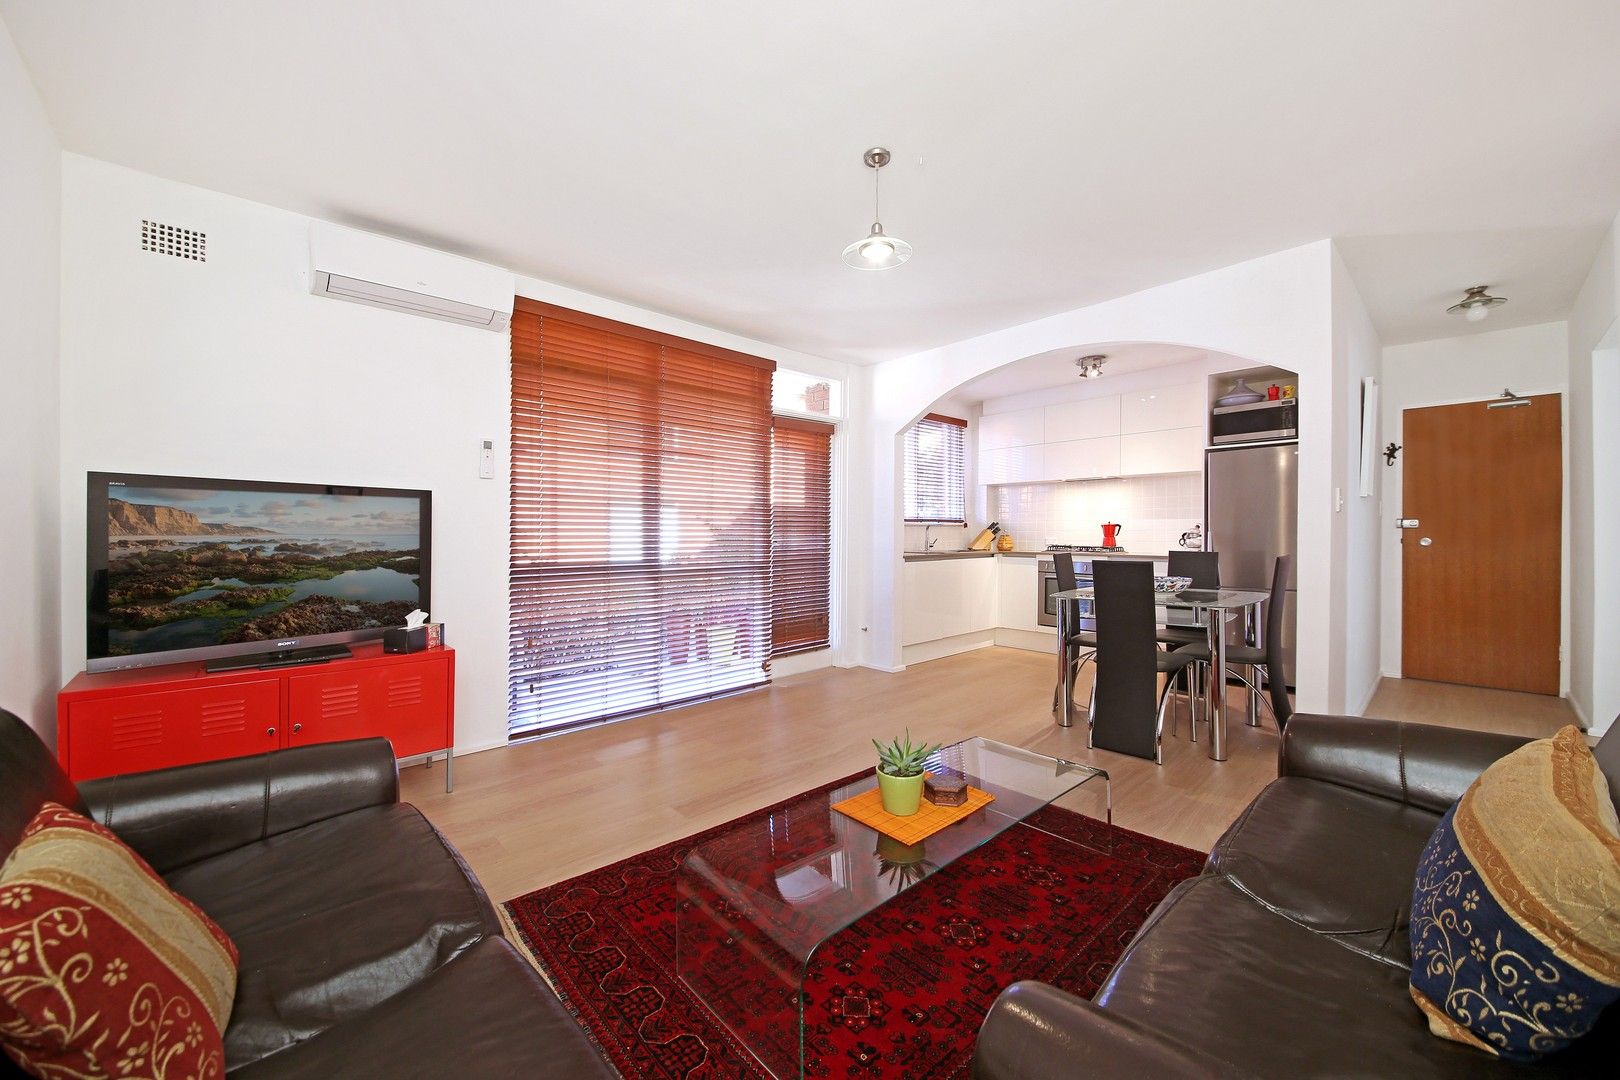 2 bedrooms Apartment / Unit / Flat in 5/59 Grosvenor Crescent SUMMER HILL NSW, 2130